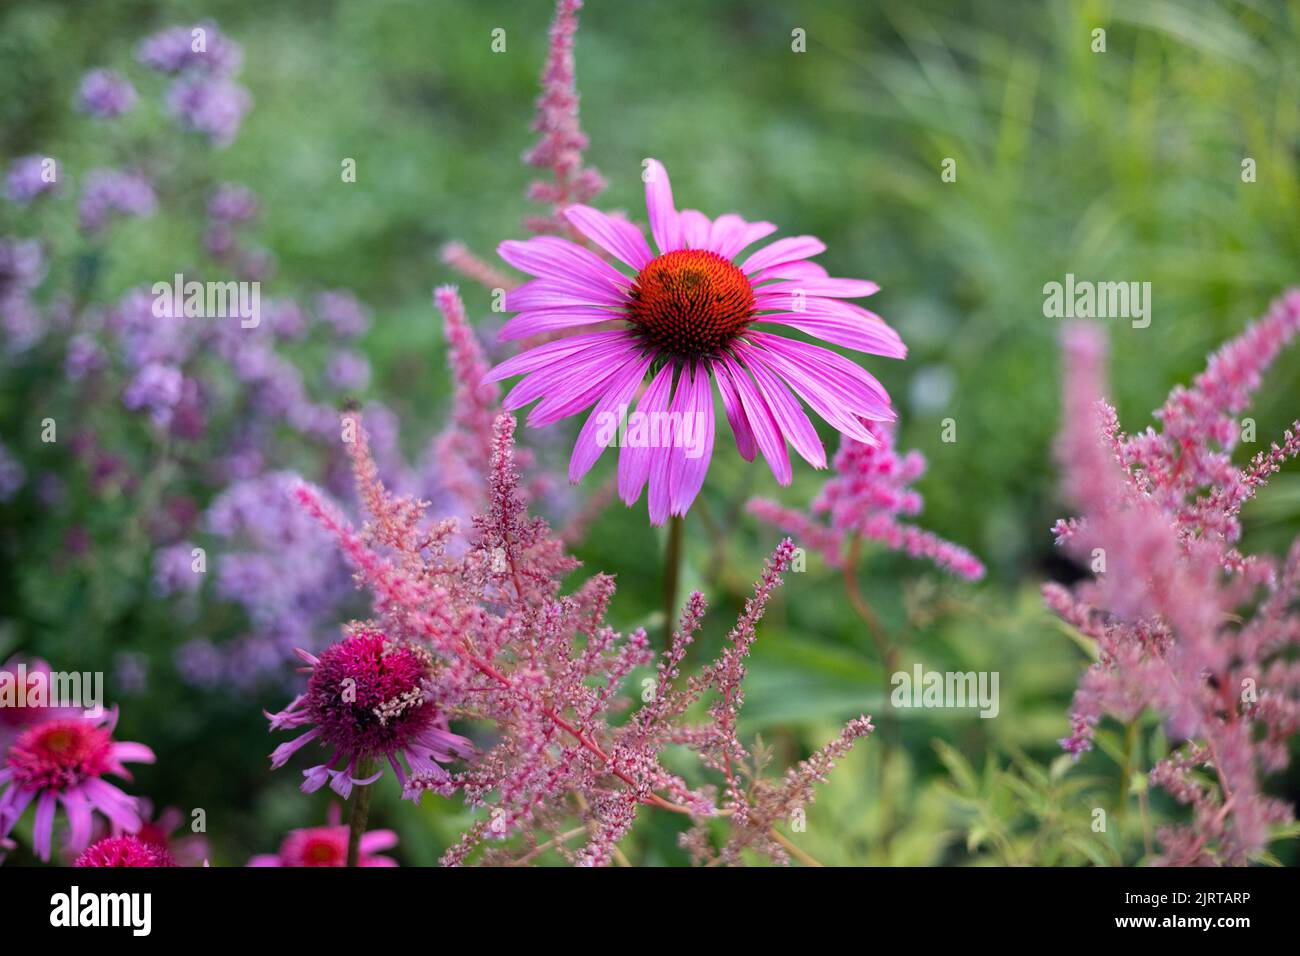 echinacia, astilbe and oregano in beautiful flower bed, selective focus Stock Photo